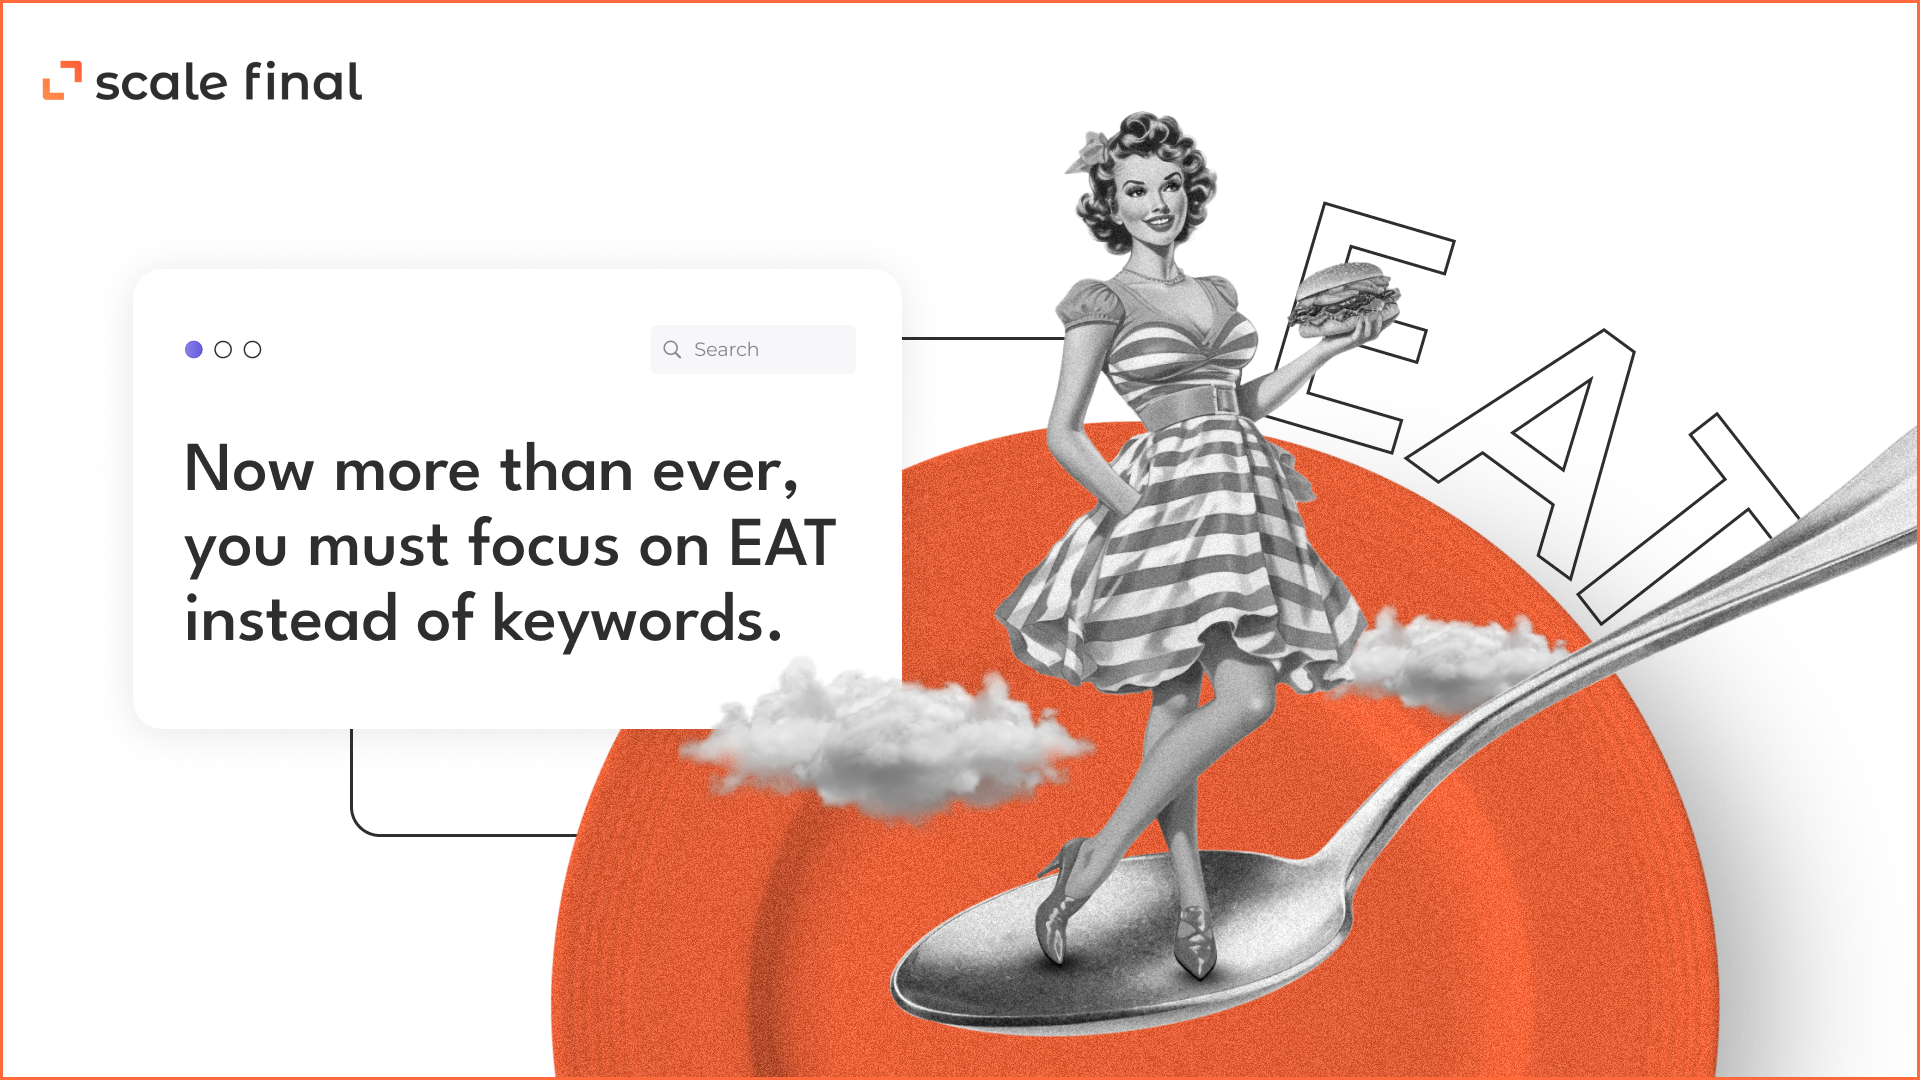 Now more than ever, you must focus on EAT instead of keywords.